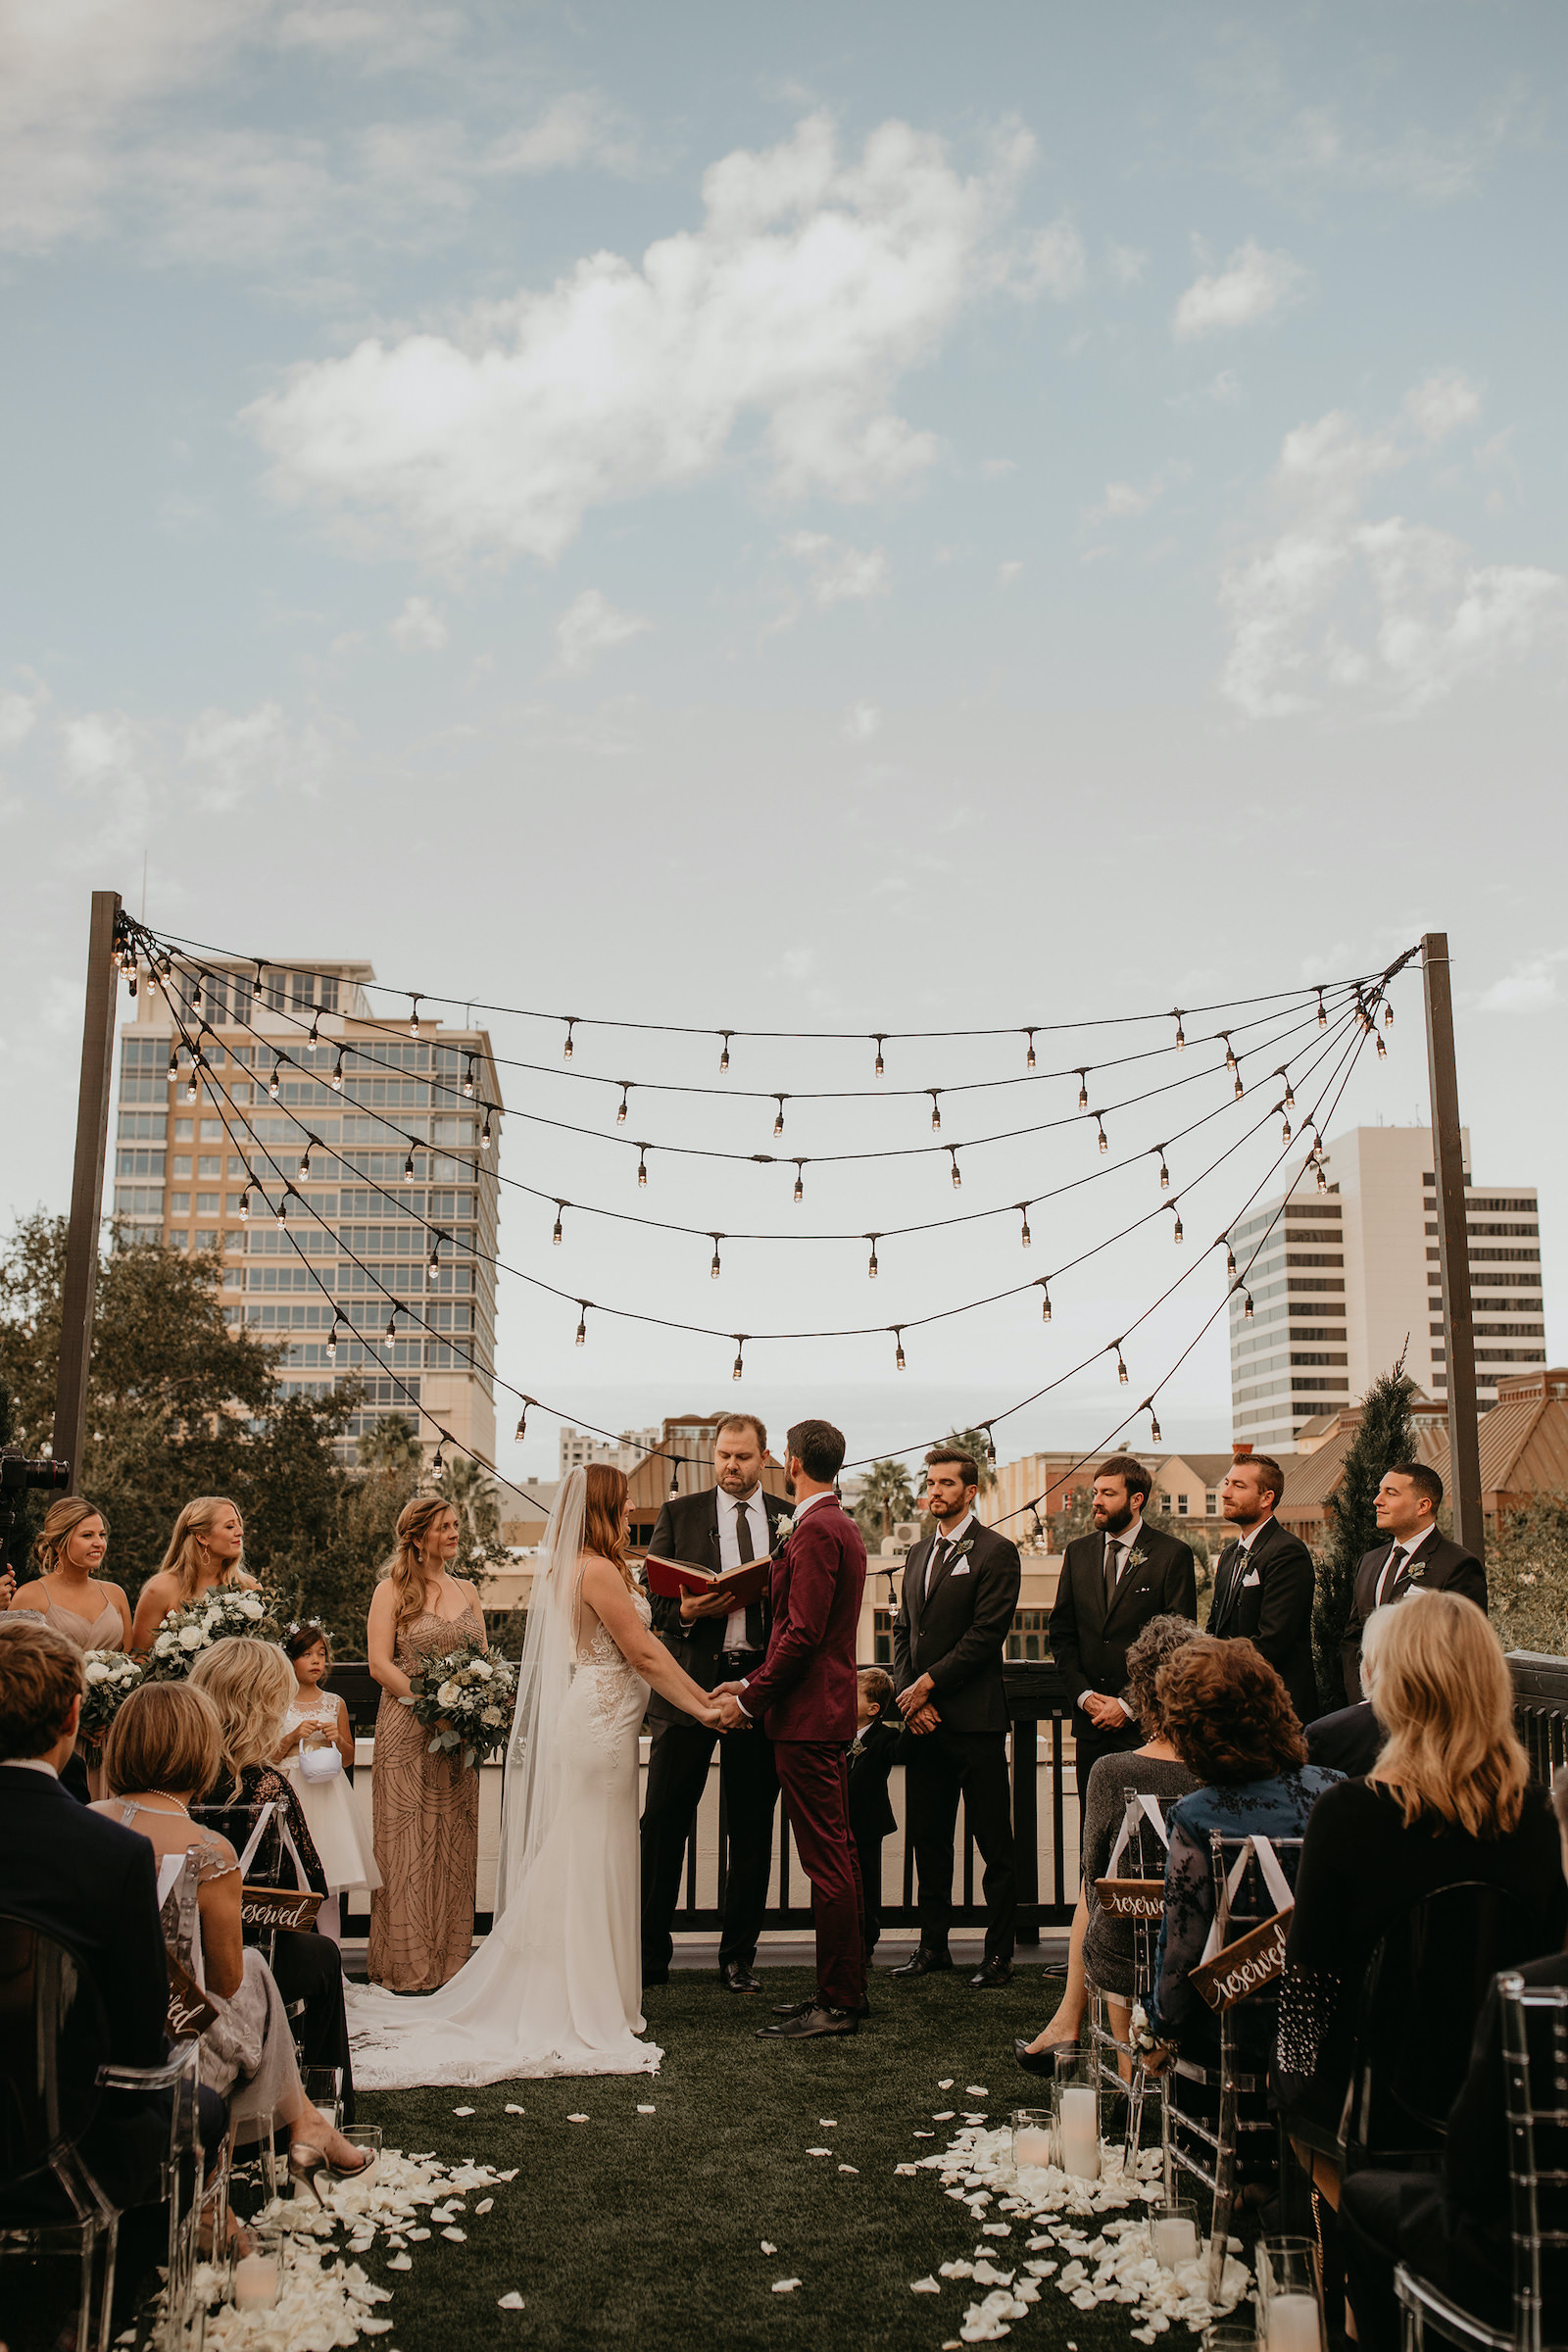 Modern Rooftop Wedding Ceremony with City Skyline and Market String Lights | Unique, Historic Downtown St. Pete Wedding Venue Station House